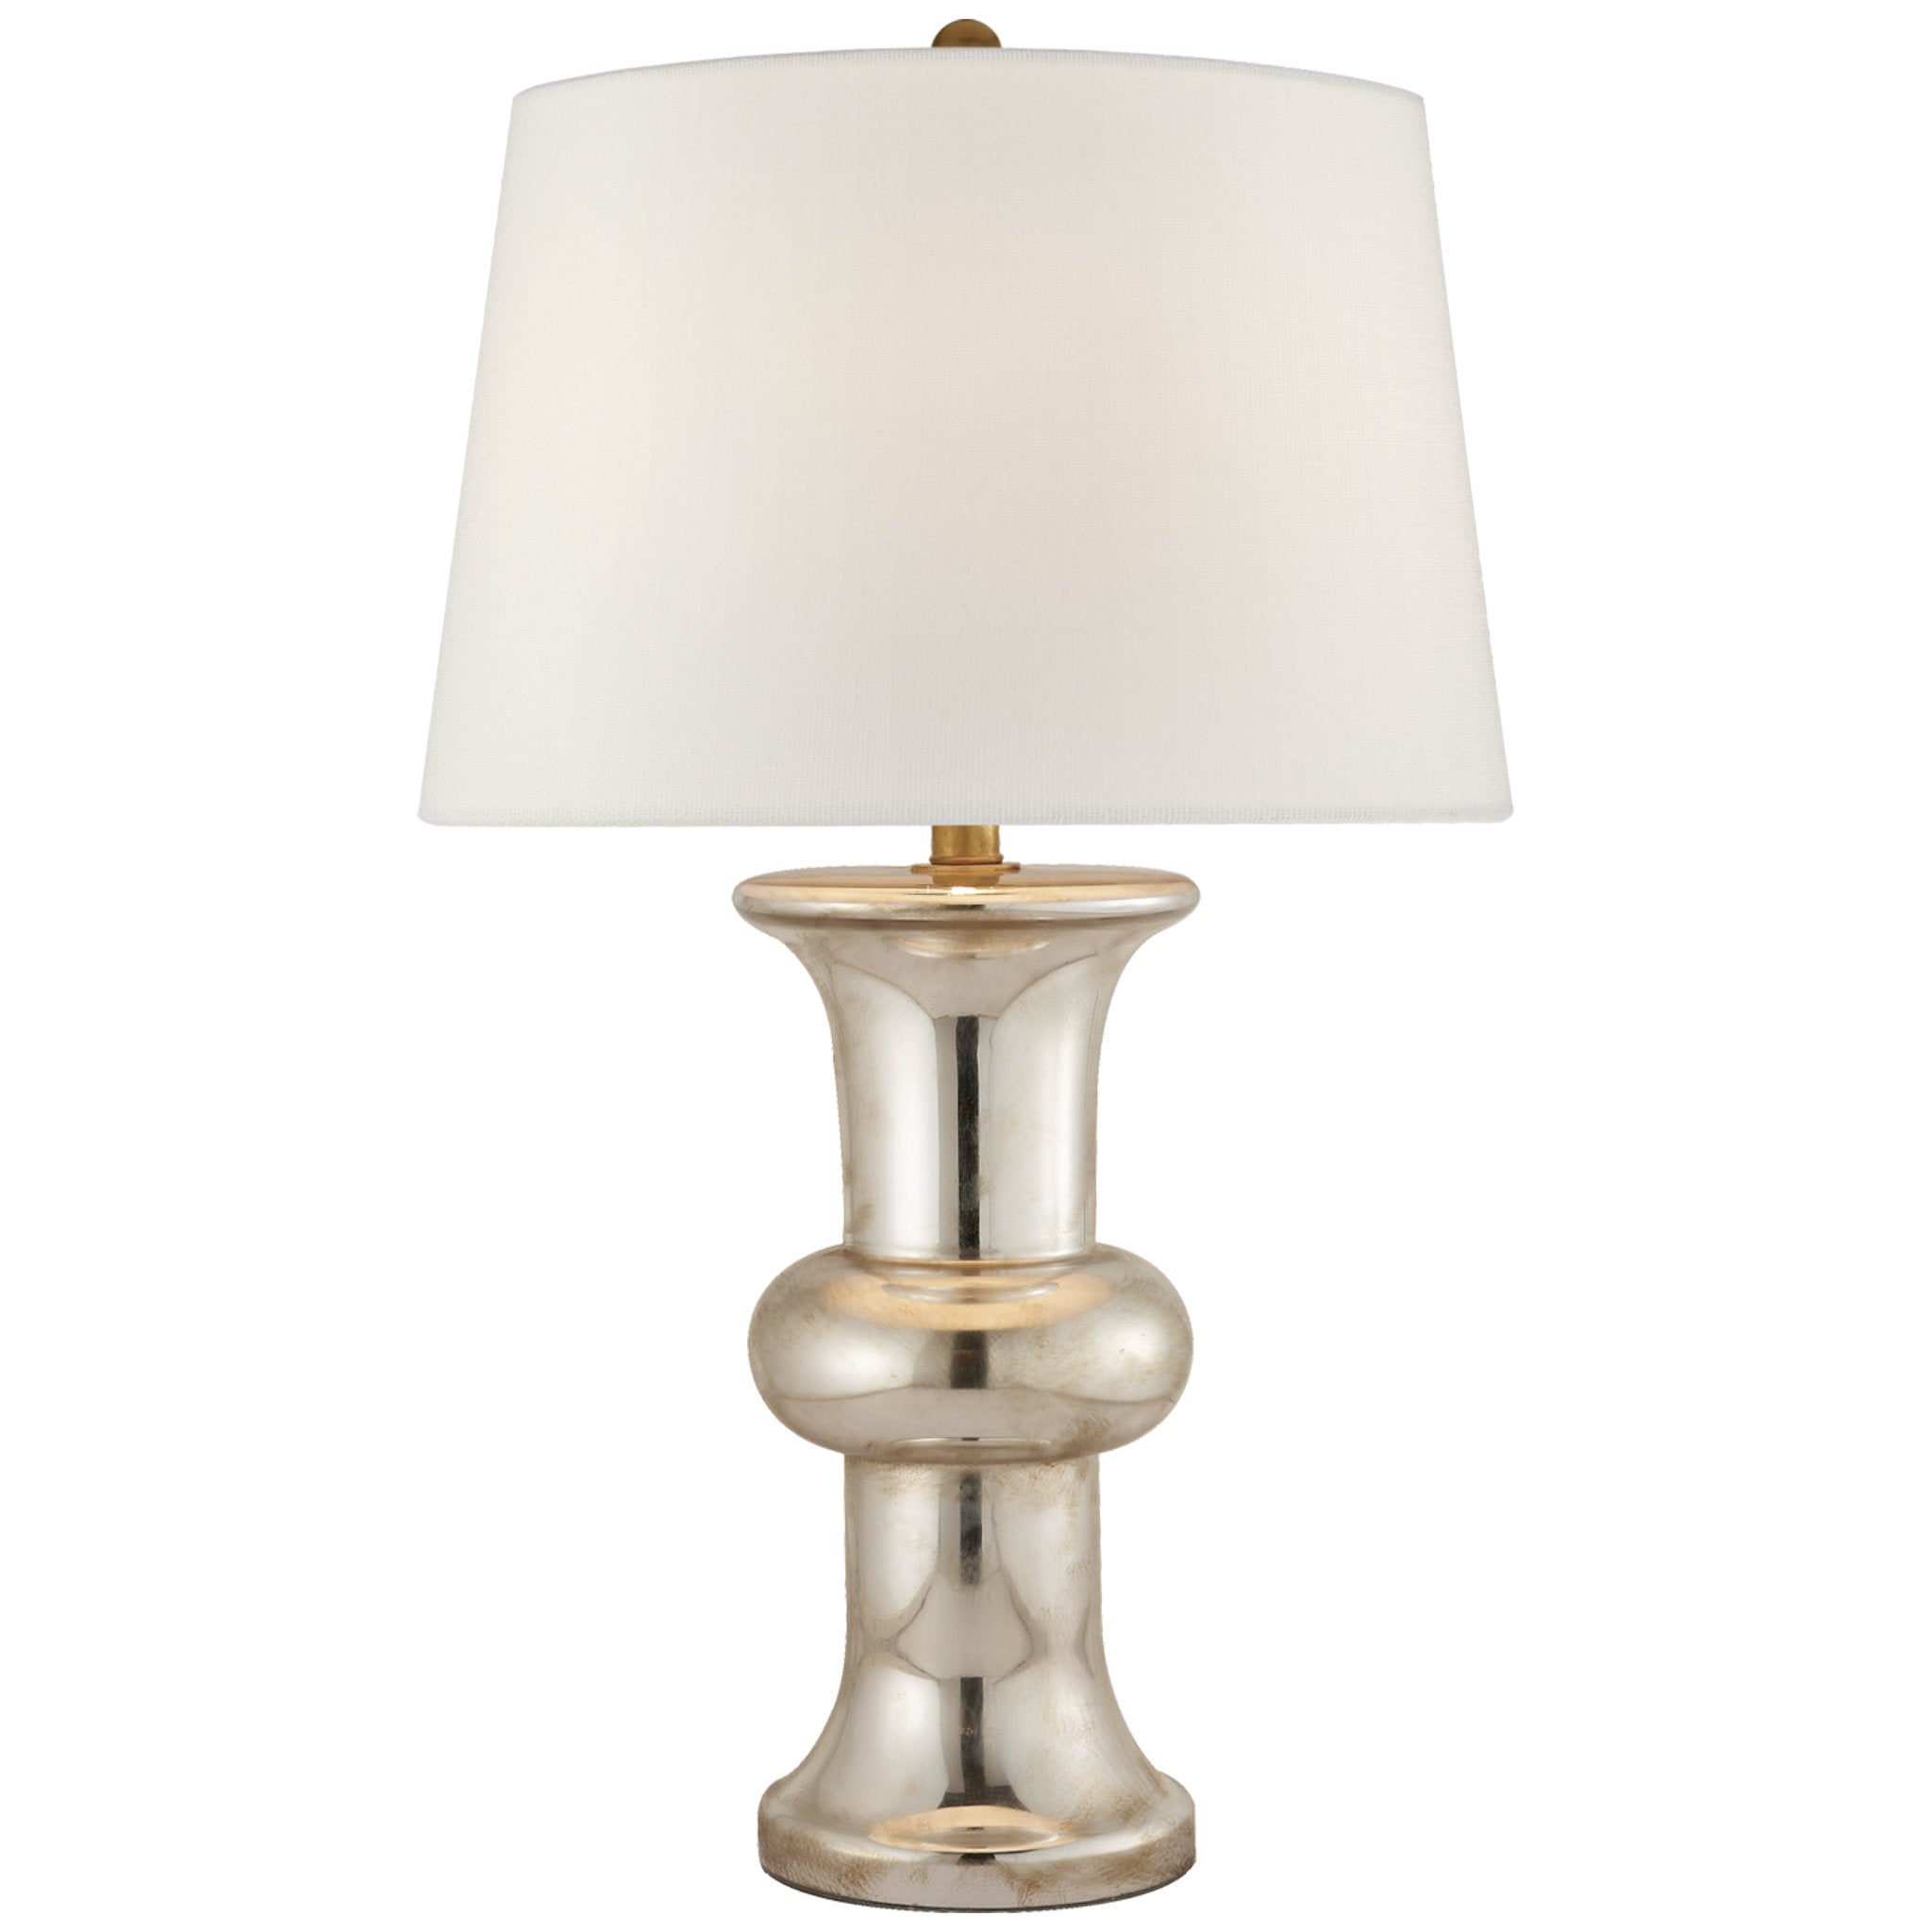 Chapman & Myers Bull Nose Cylinder Table Lamp in Mercury Glass with Linen Shade